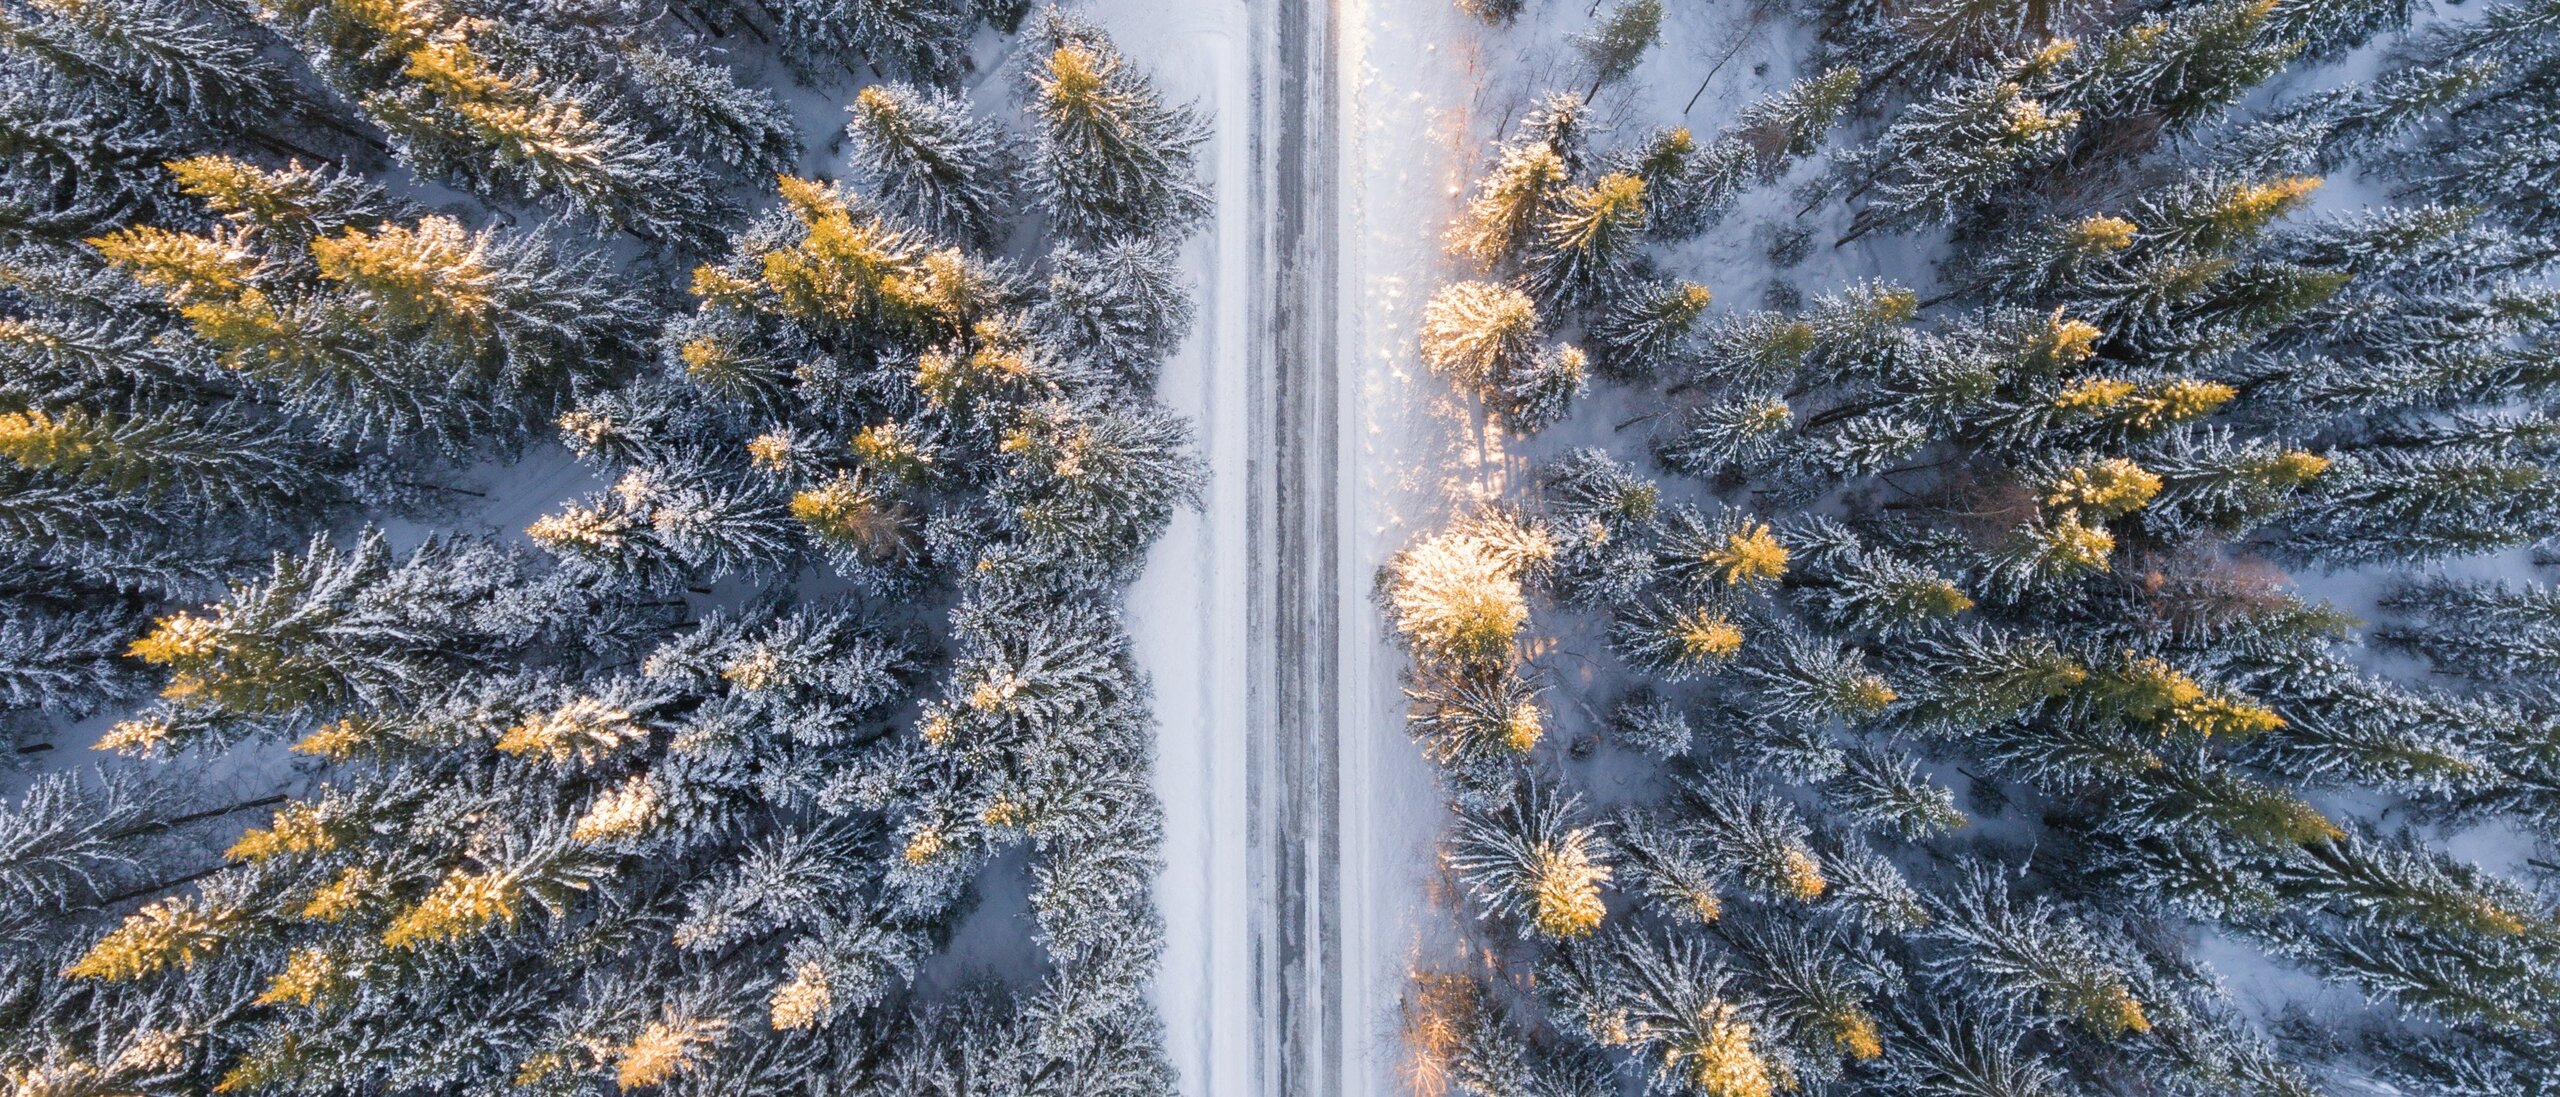 Aerial photo of snowy forest and road